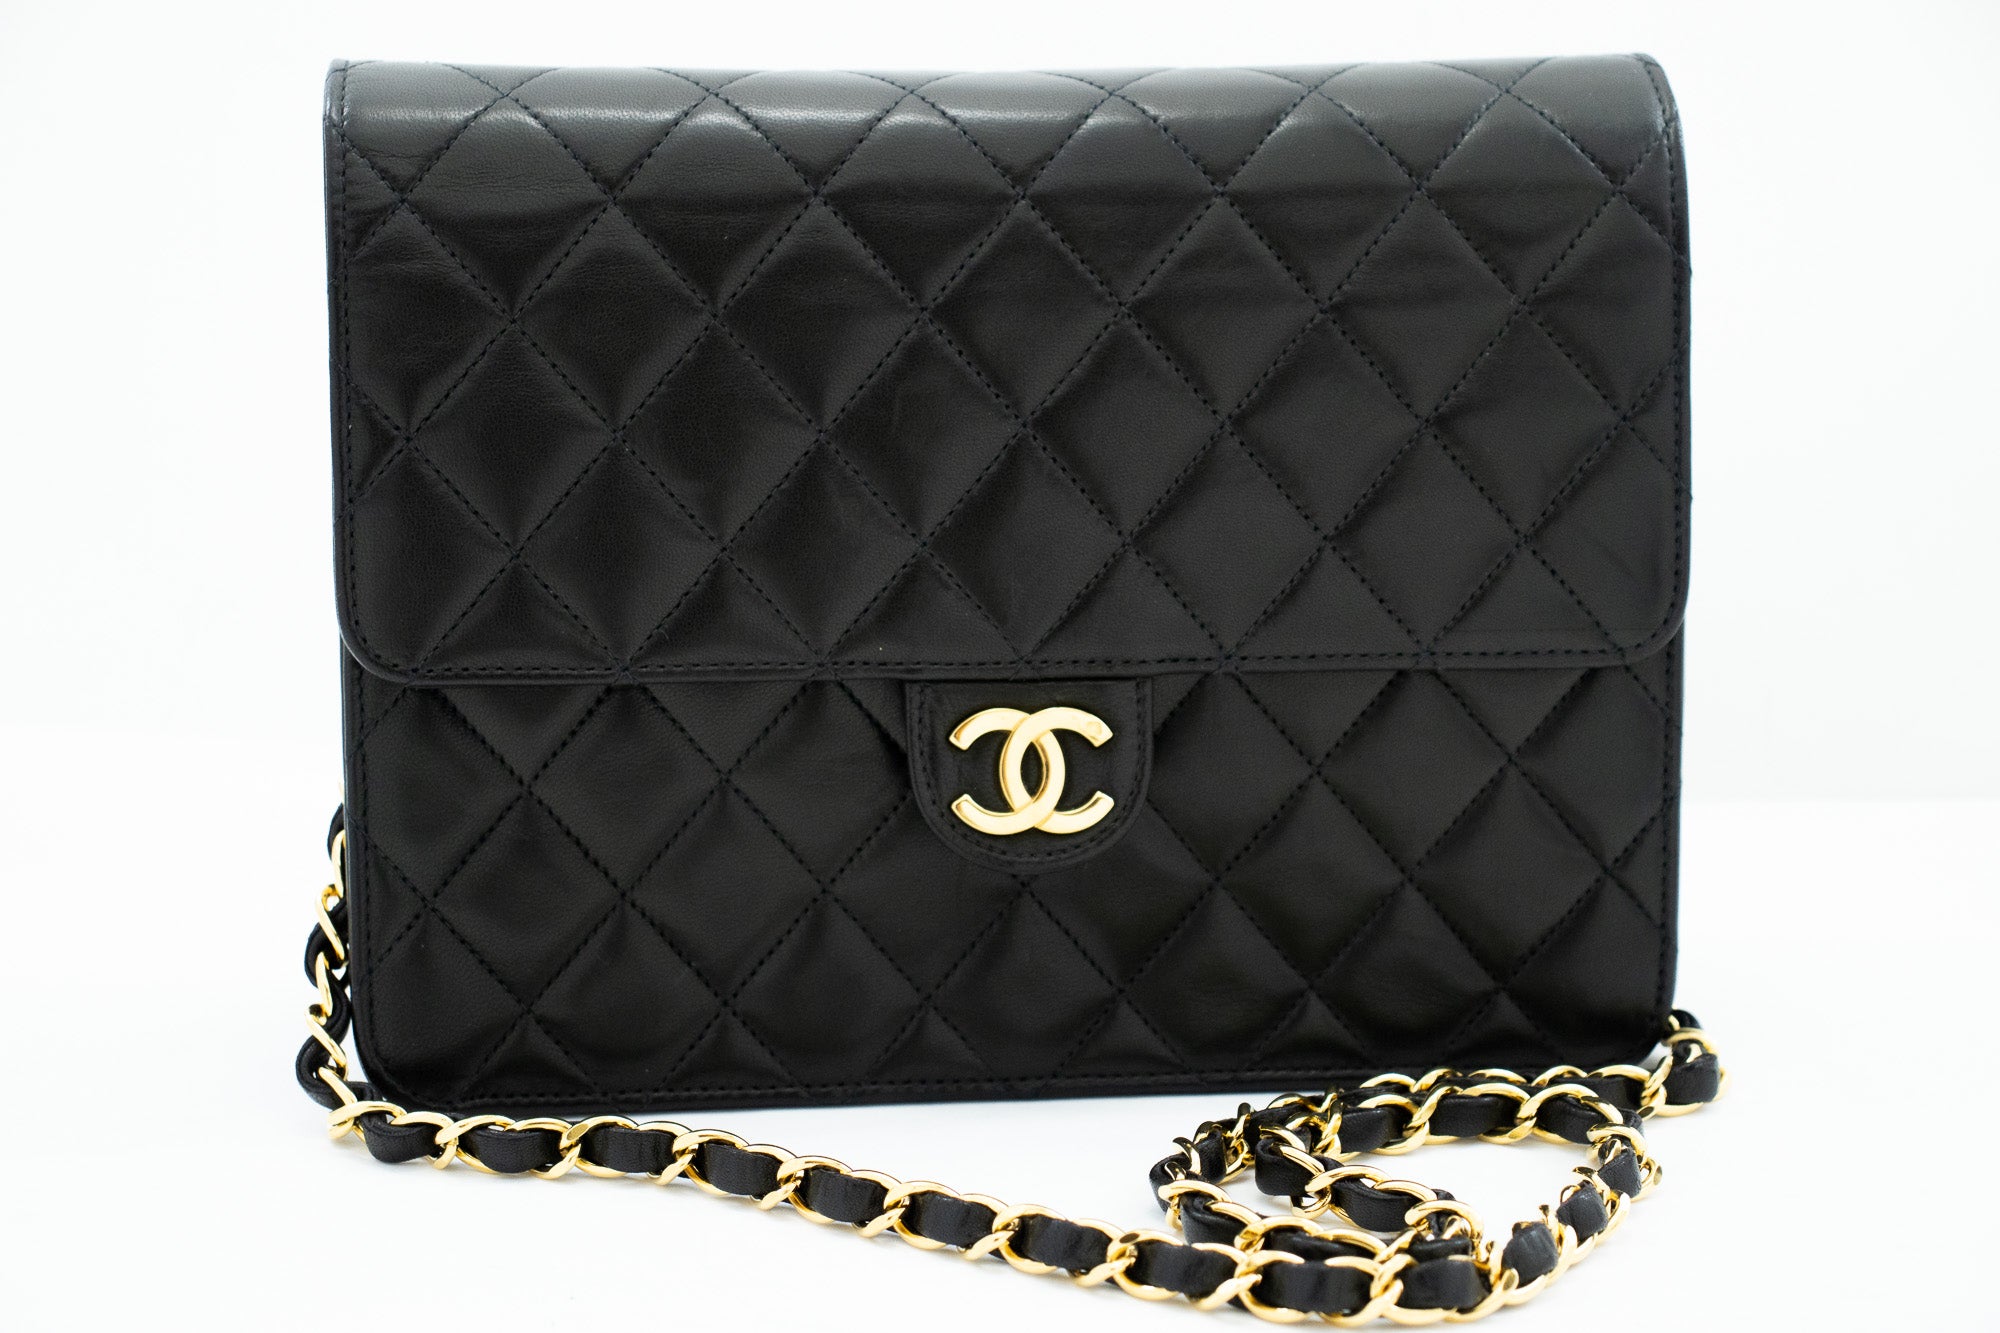 Chanel Chain Shoulder Bag Clutch Black Quilted Flap Lambskin Purse K14